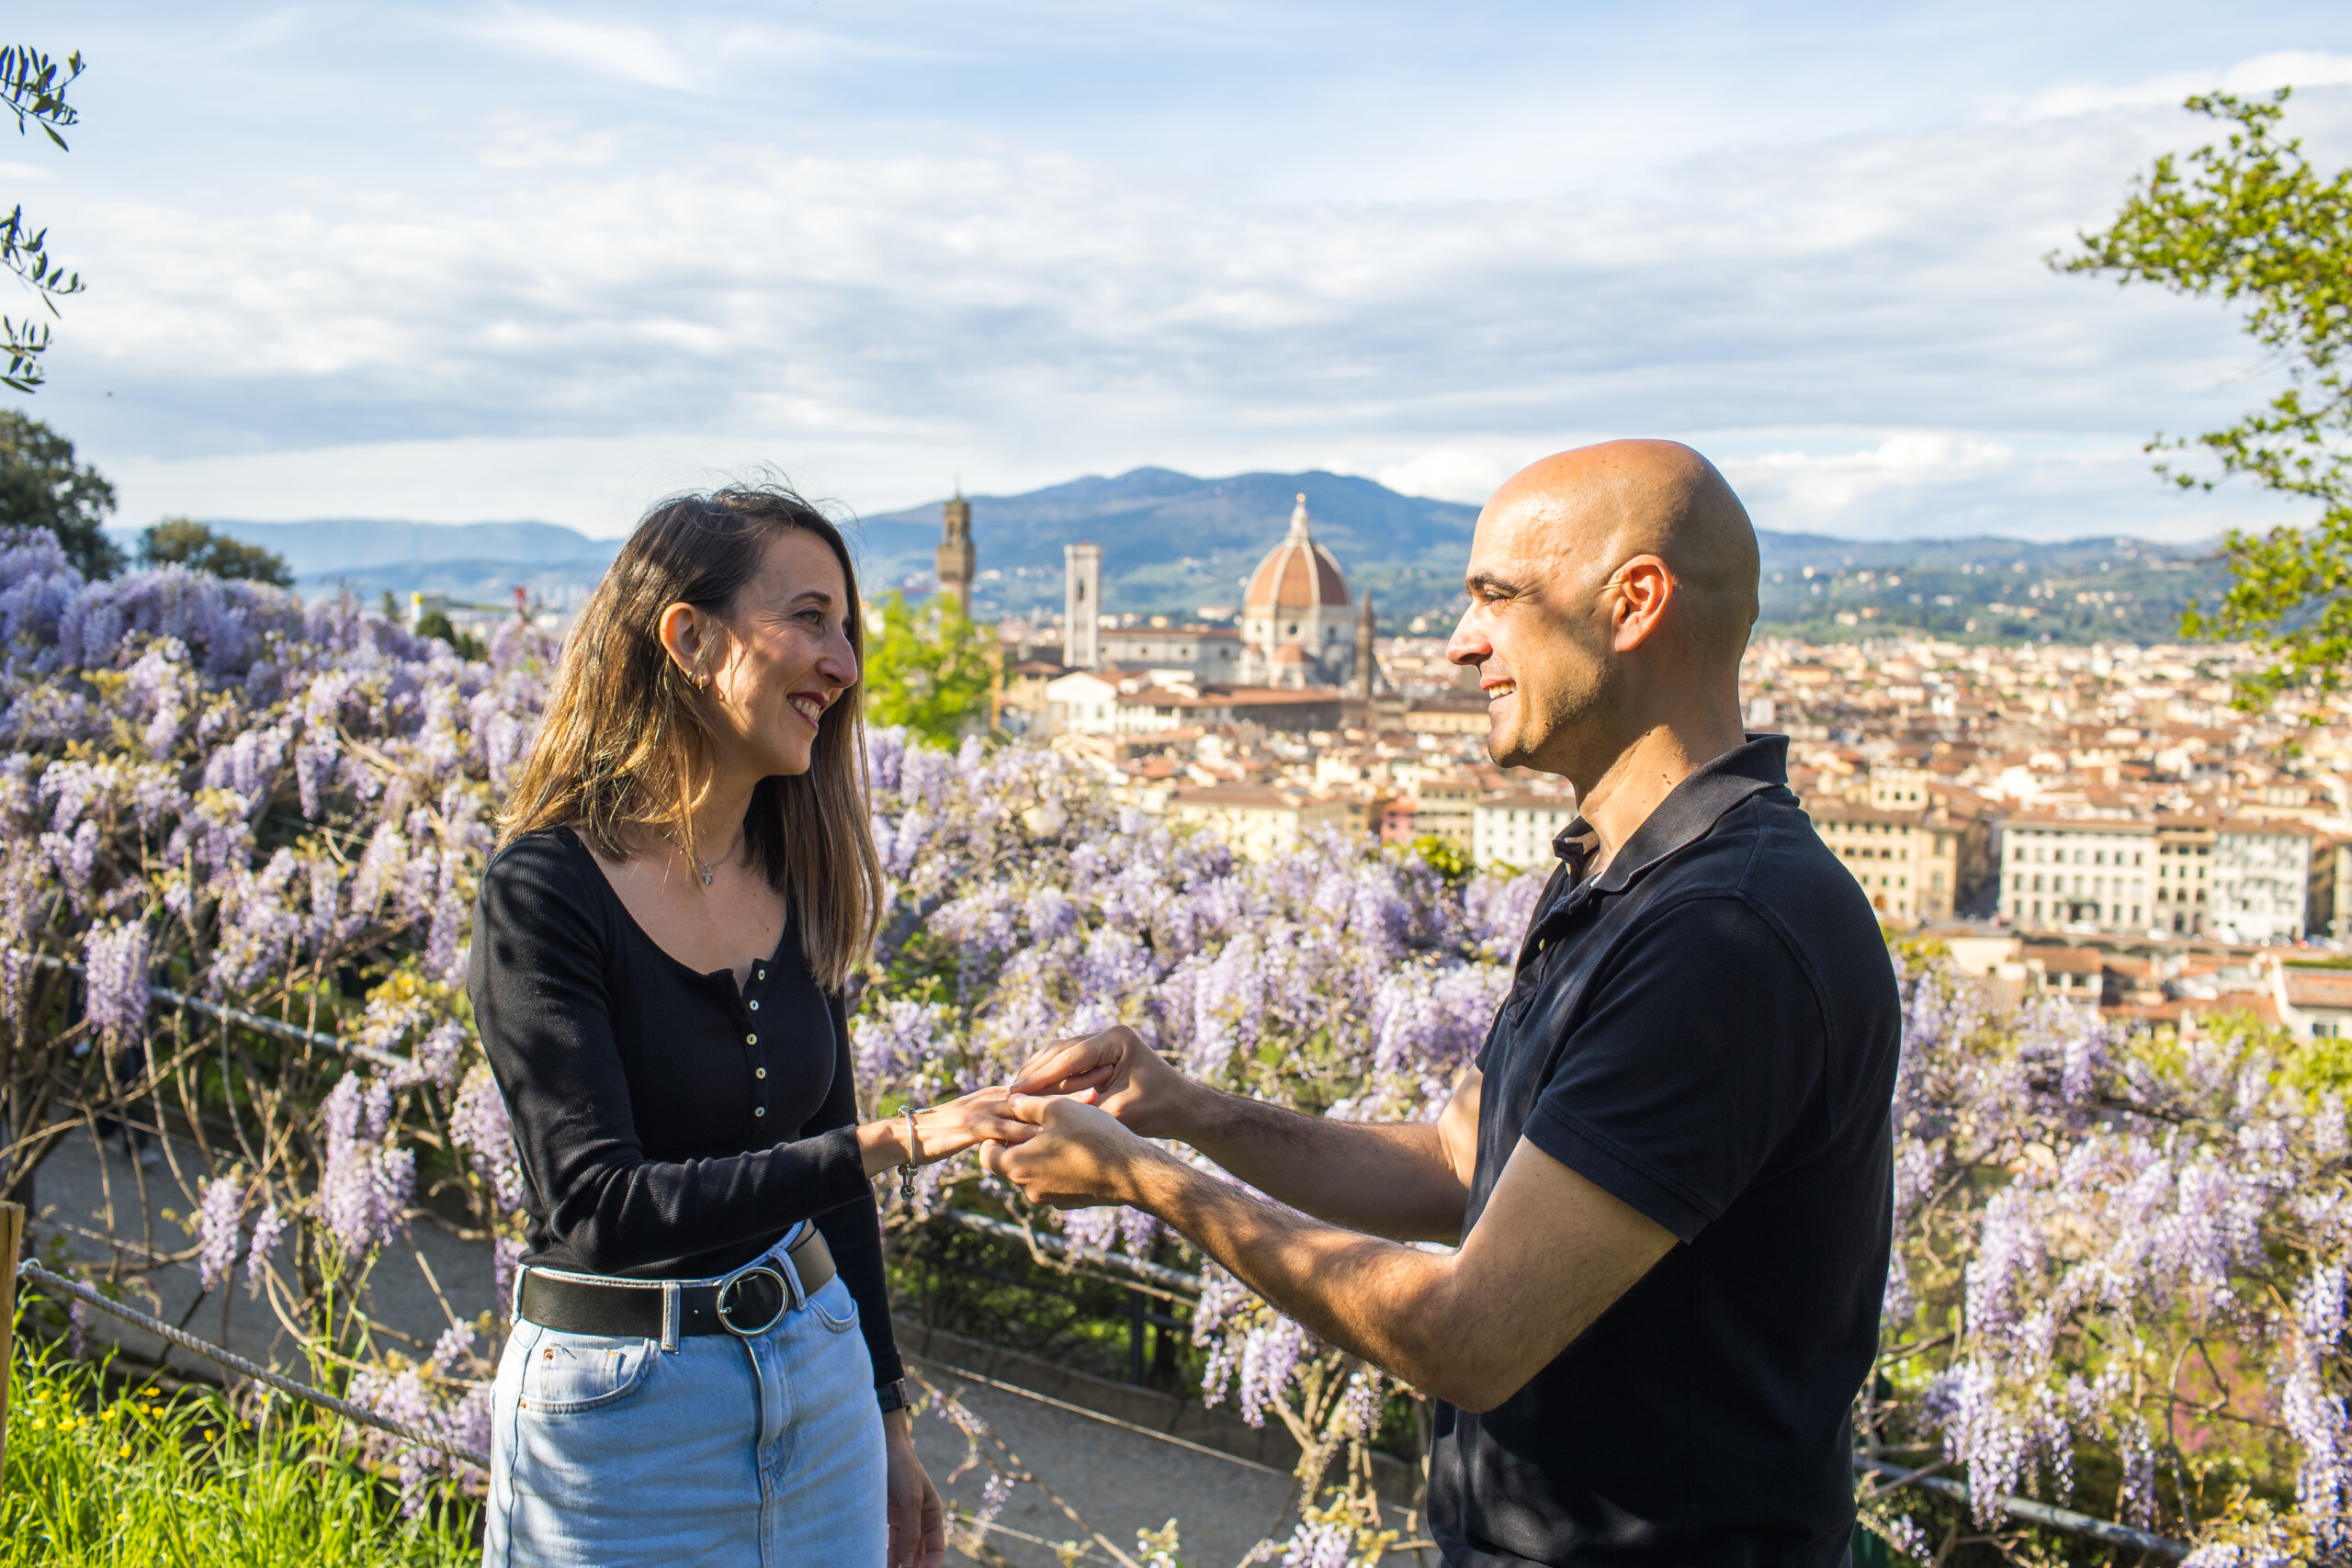 Proposal photoshoot by Alessandro G., Localgrapher in Florence